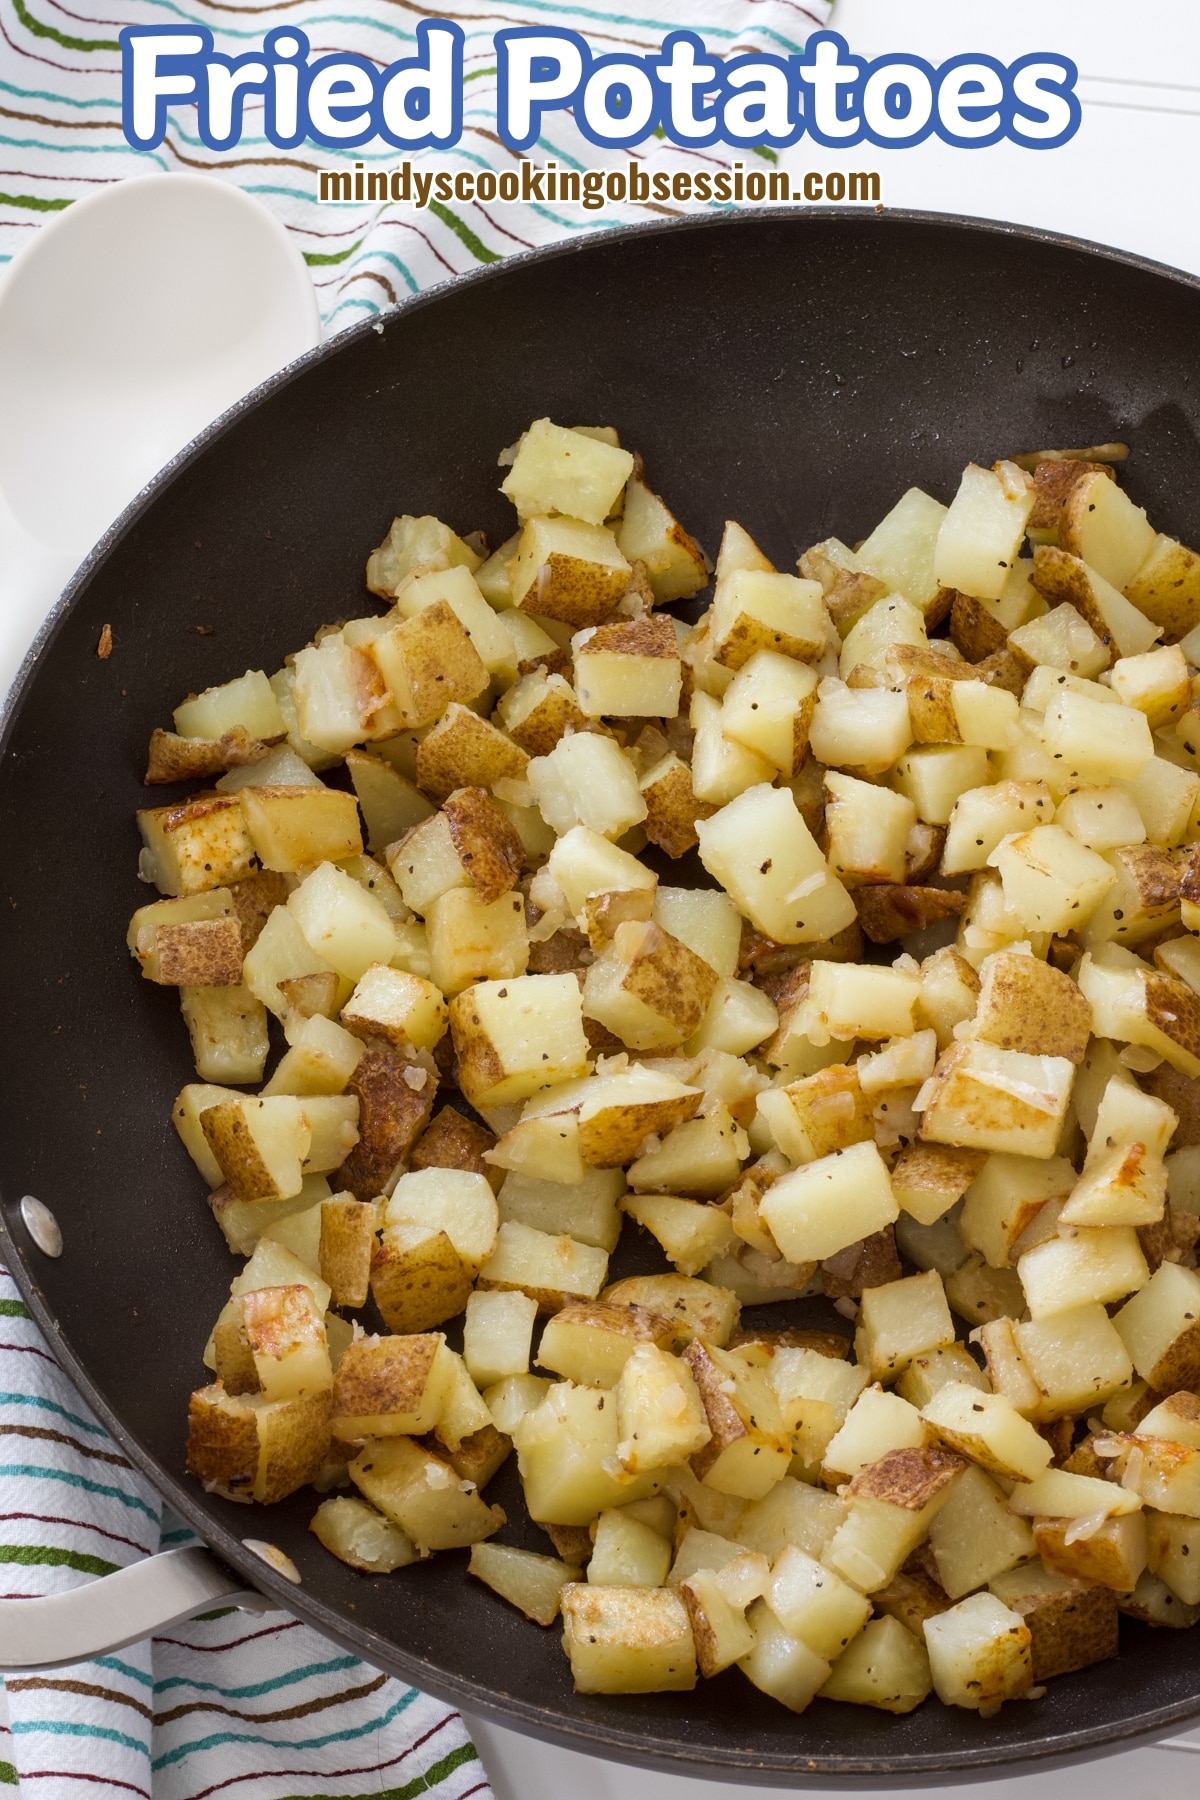 Discover the ultimate guide to crafting the best homemade pan-fried potatoes with this easy recipe. A great side dish for dinner or breakfast! via @mindyscookingobsession